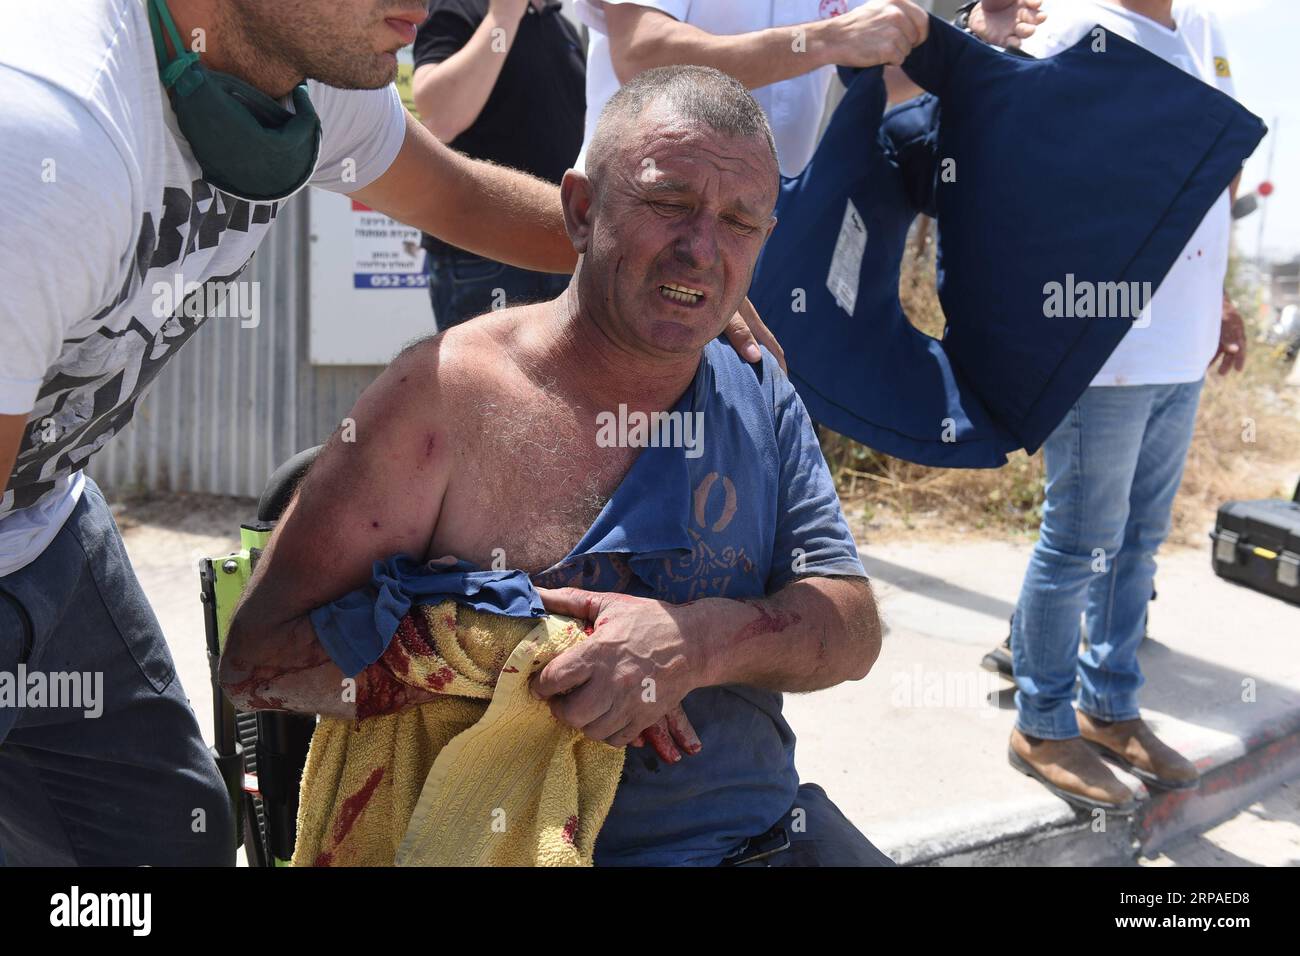 (190506) -- ASHDOD, May 6, 2019 -- Photo taken on May 5, 2019 shows a man injured in a rocket attack in the coastal city of Ashdod. Four Israeli civilians were killed on Sunday and more than 70 injured by rockets fired by the Palestinians from the Gaza Strip. ) MIDEAST-GAZA-CONFLICT JINI PUBLICATIONxNOTxINxCHN Stock Photo